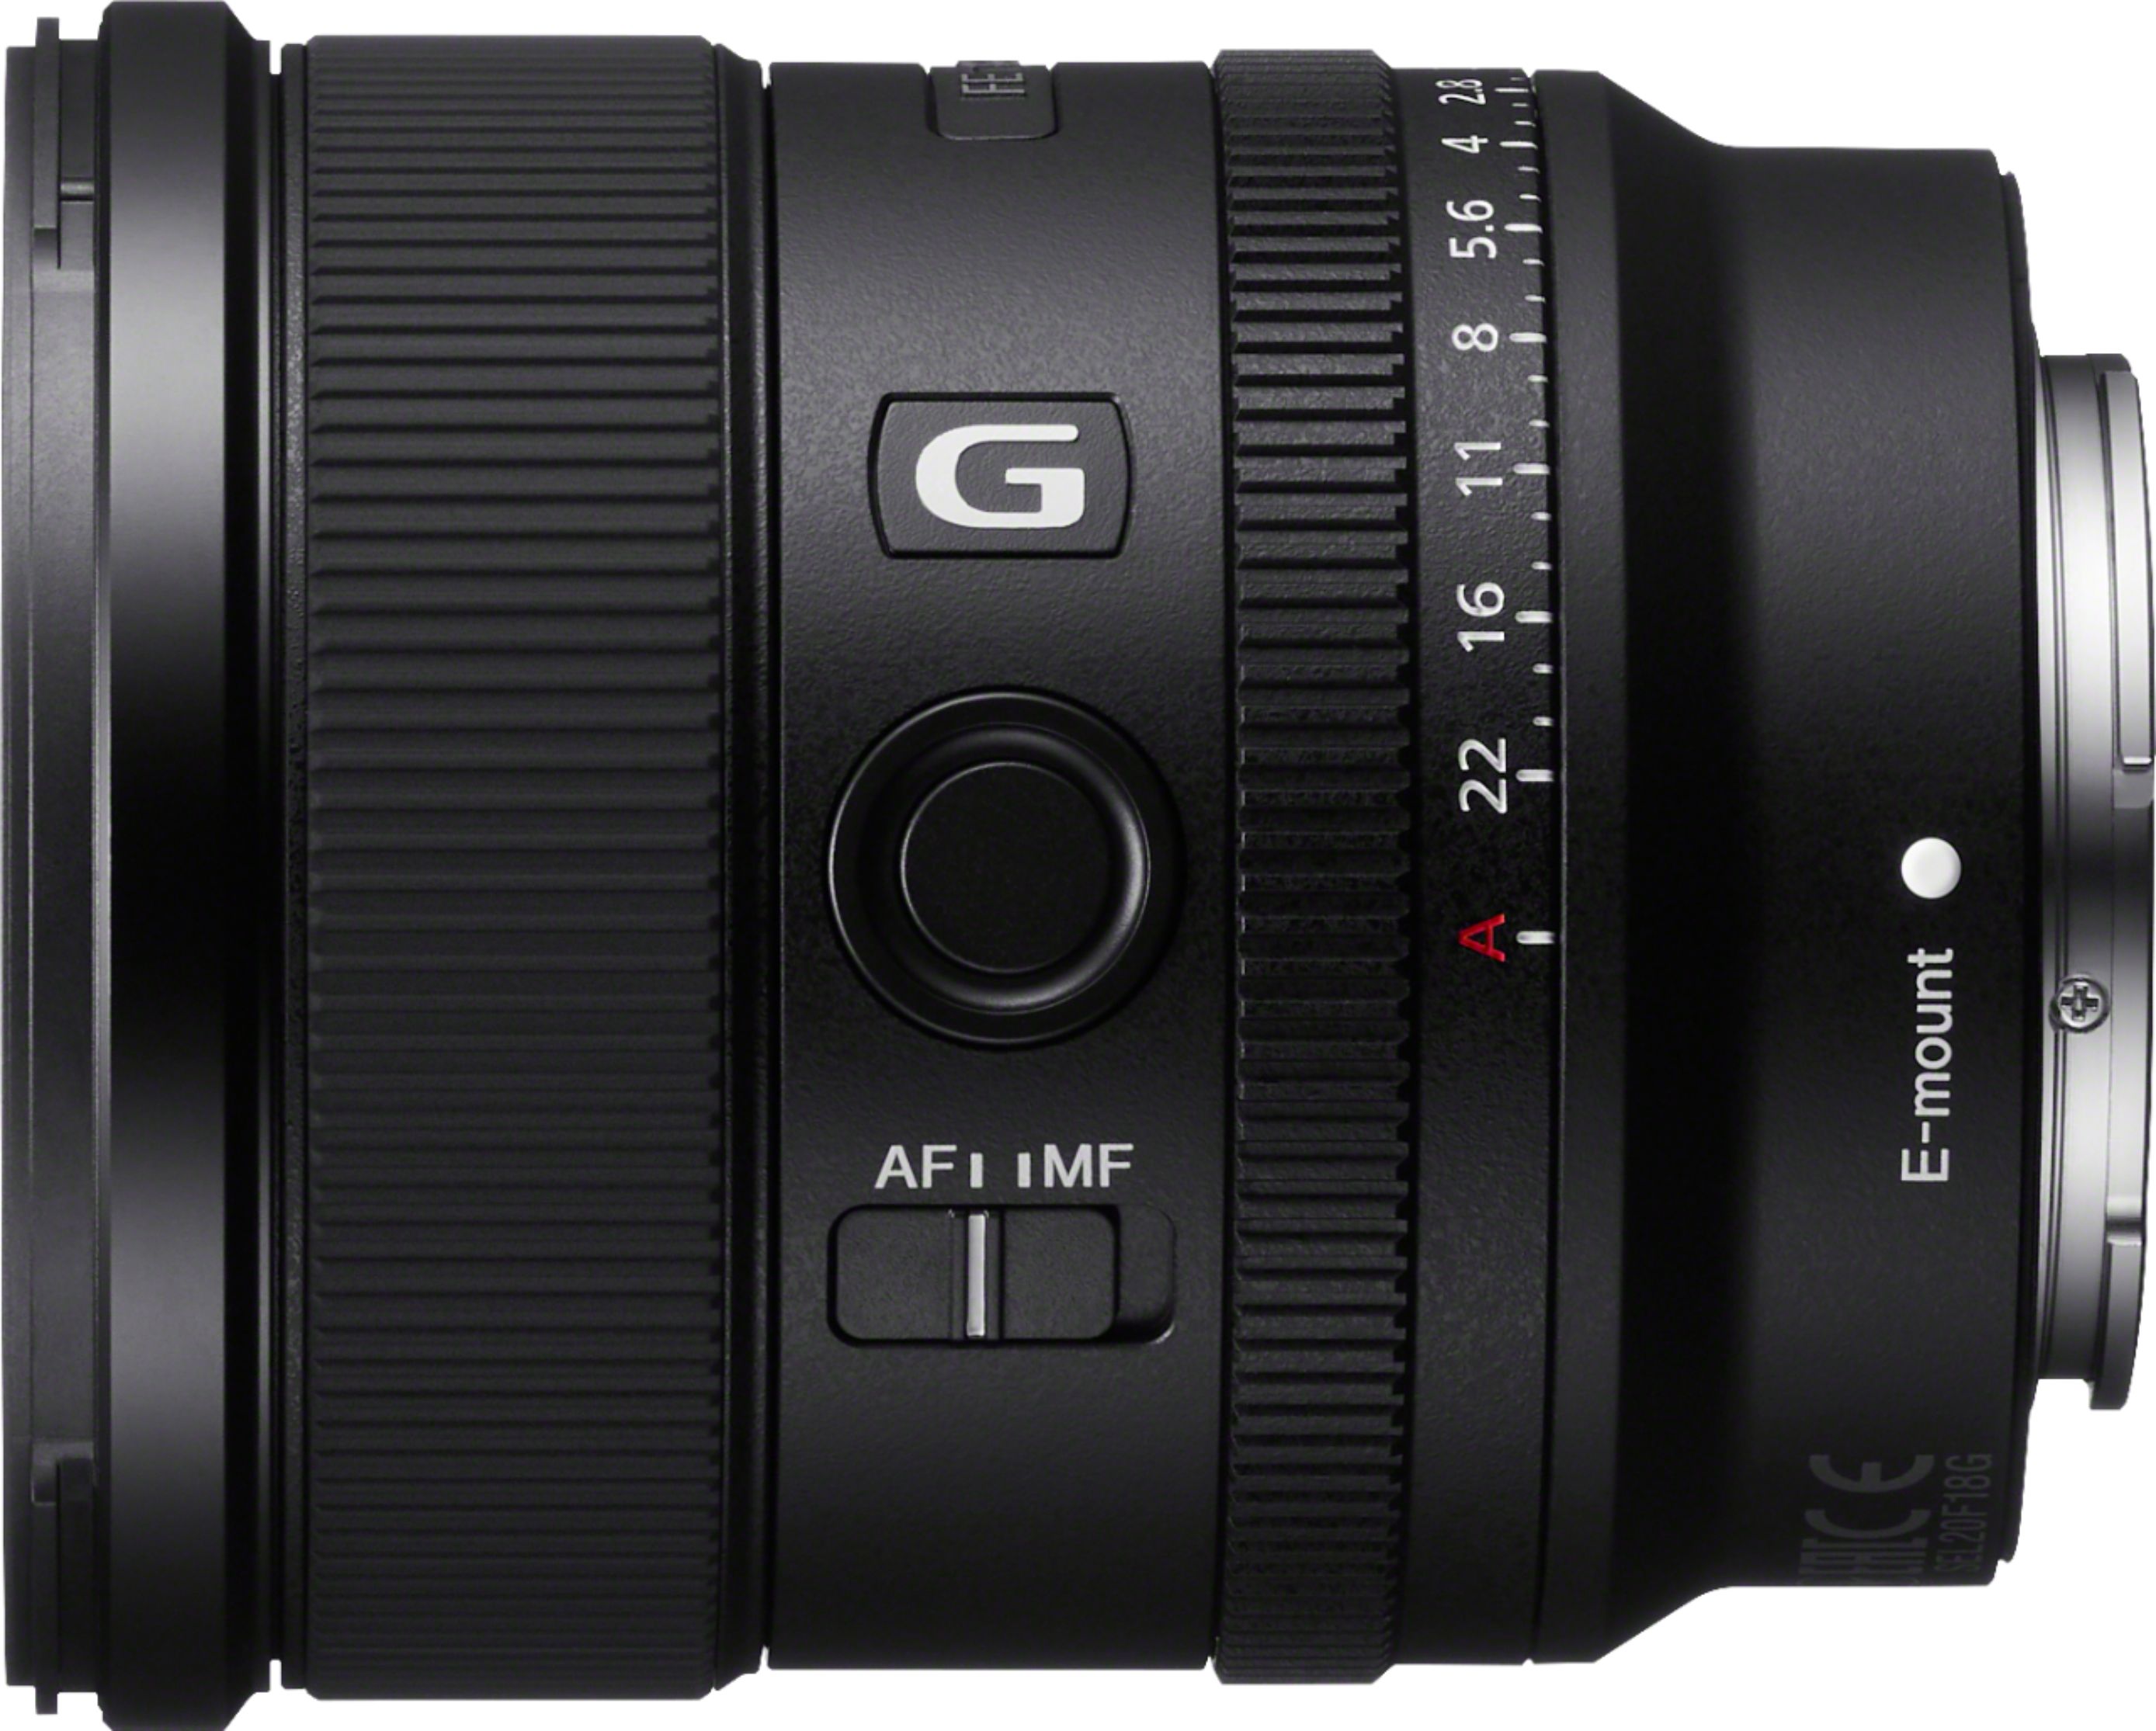 Sony FE 20mm f/1.8 G Ultra Wide Angle Prime Lens for E-mount 